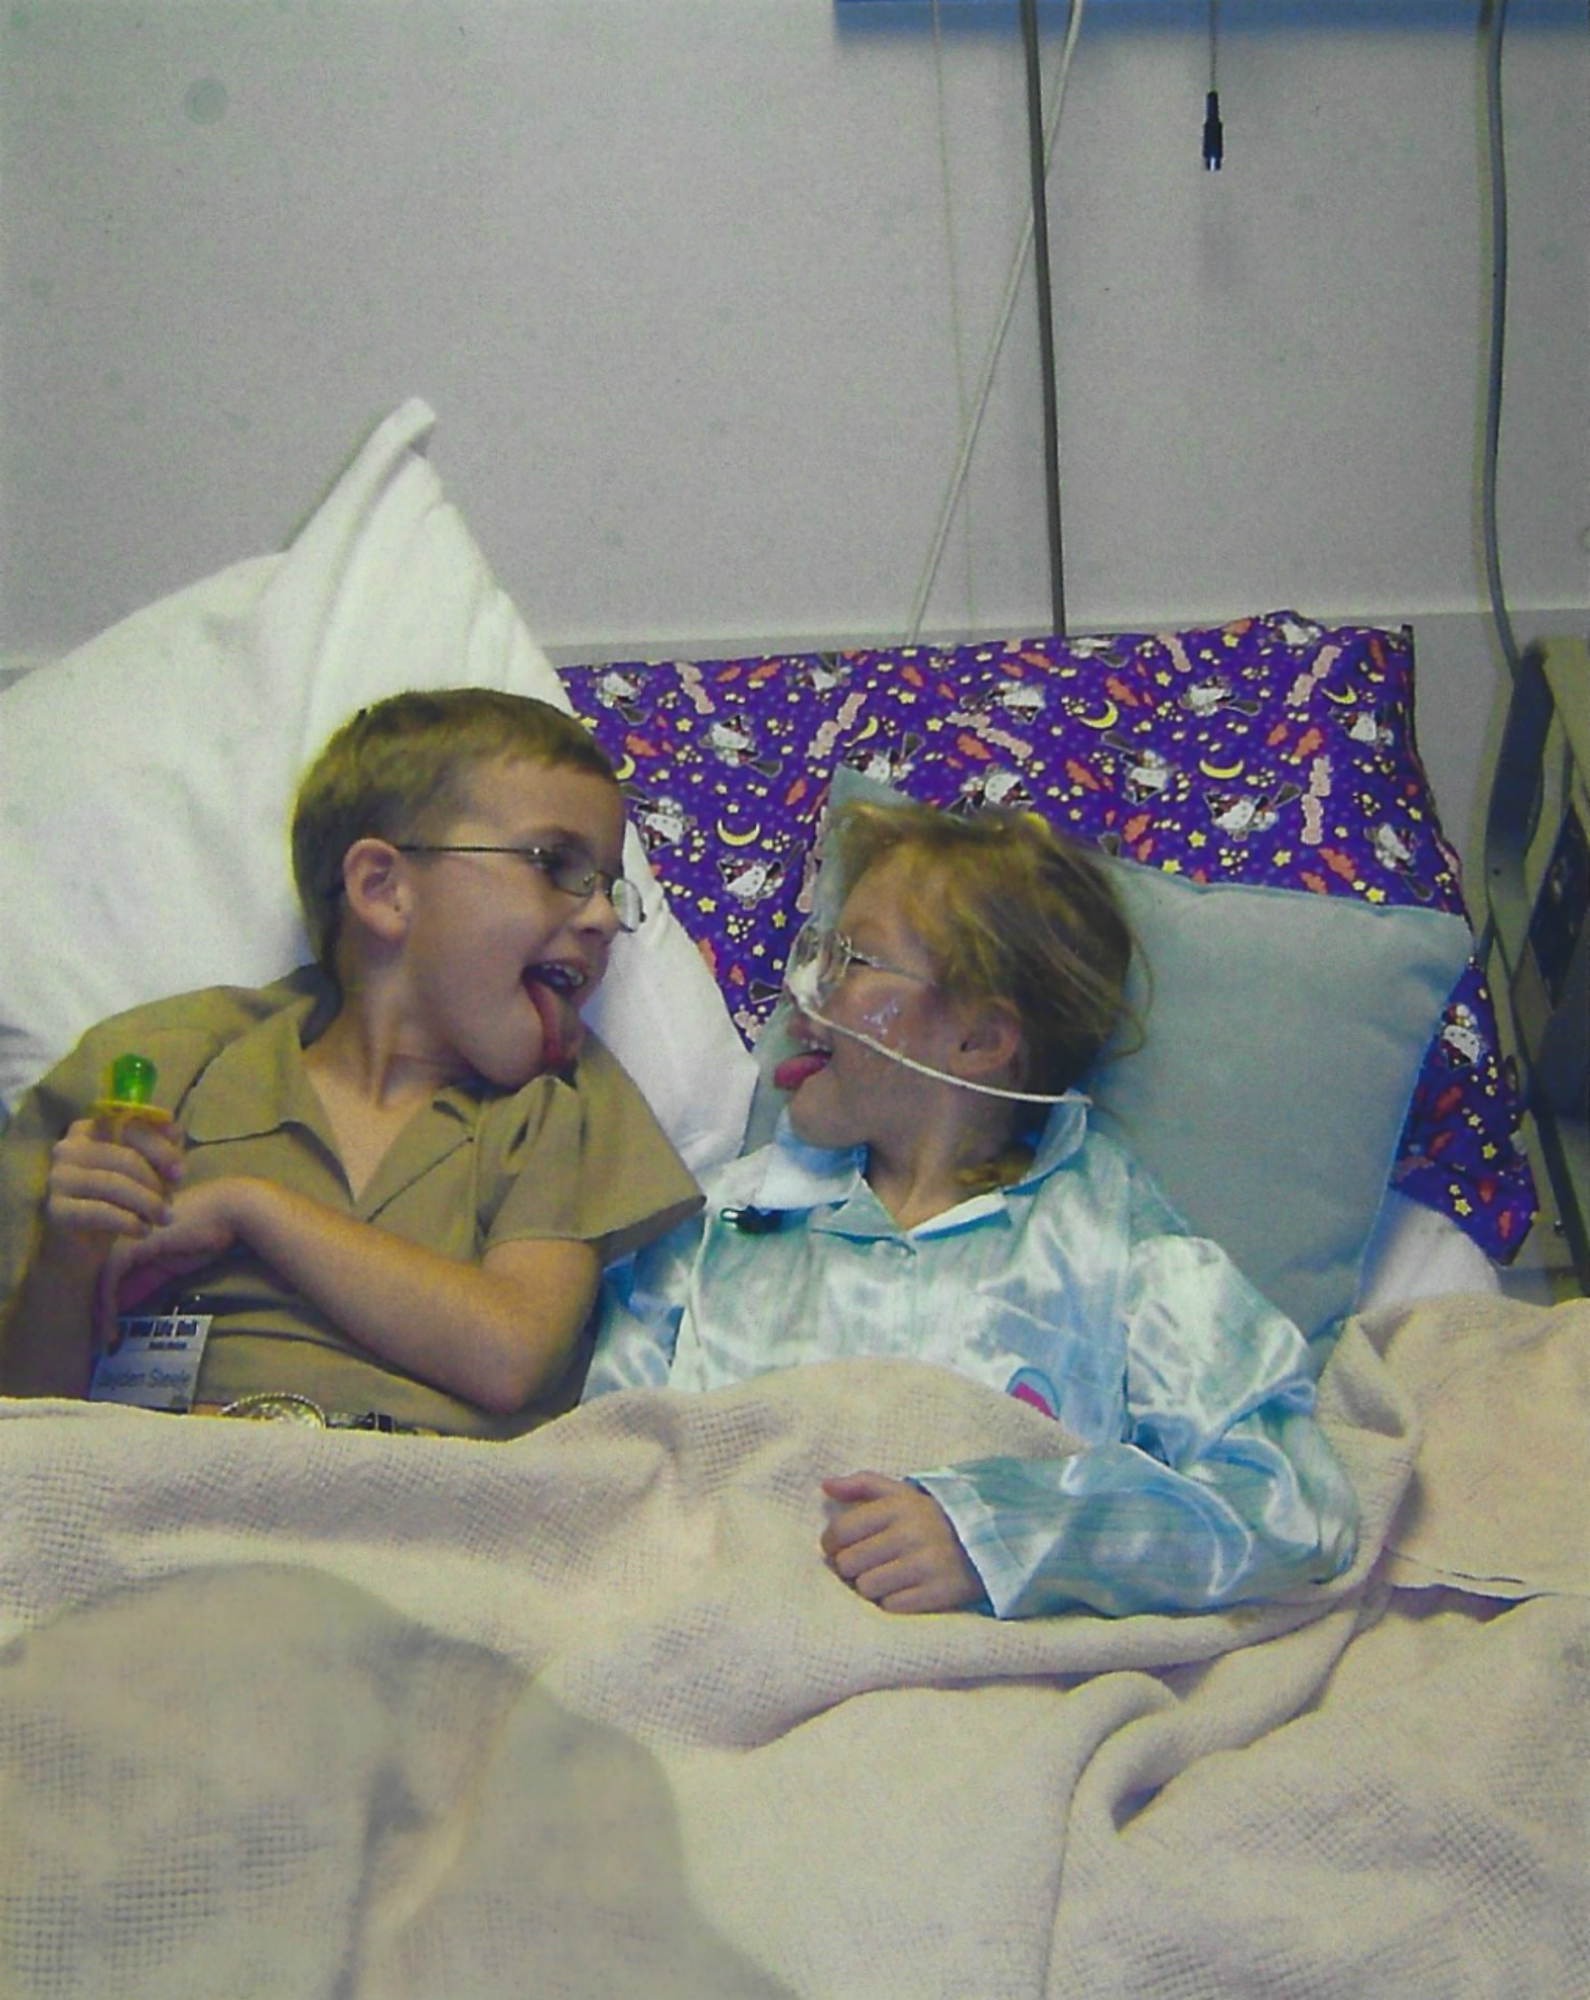 Jayden and Tori grew up with a tight brother-sister bond.